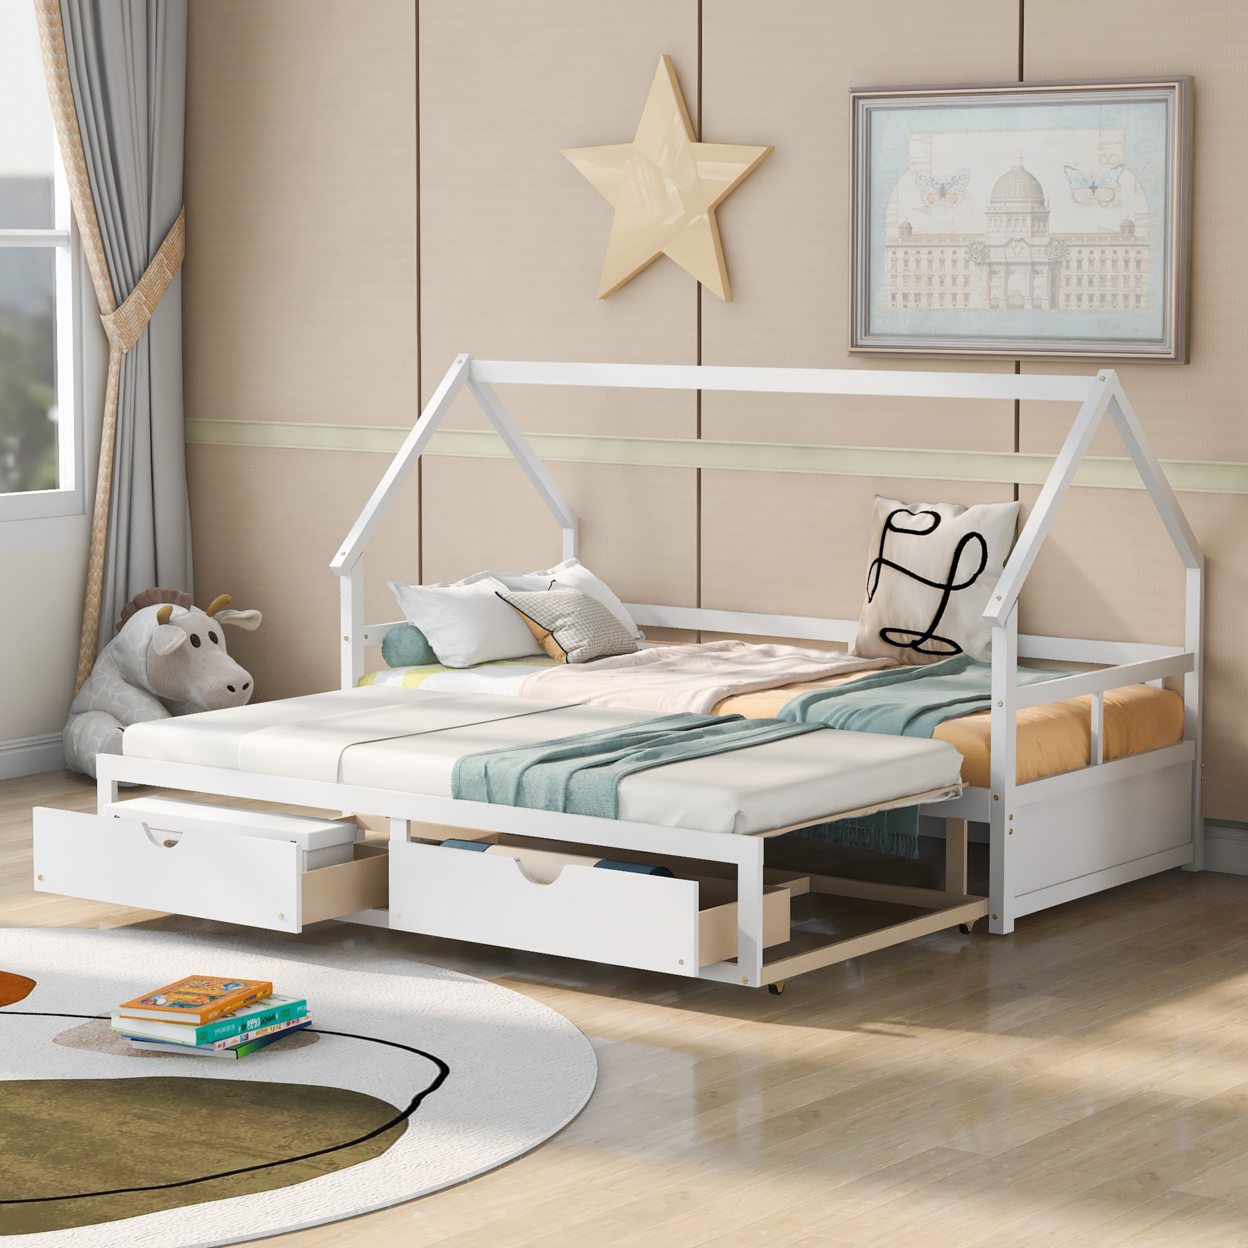 Extending Wooden Daybed with Two Drawers, White